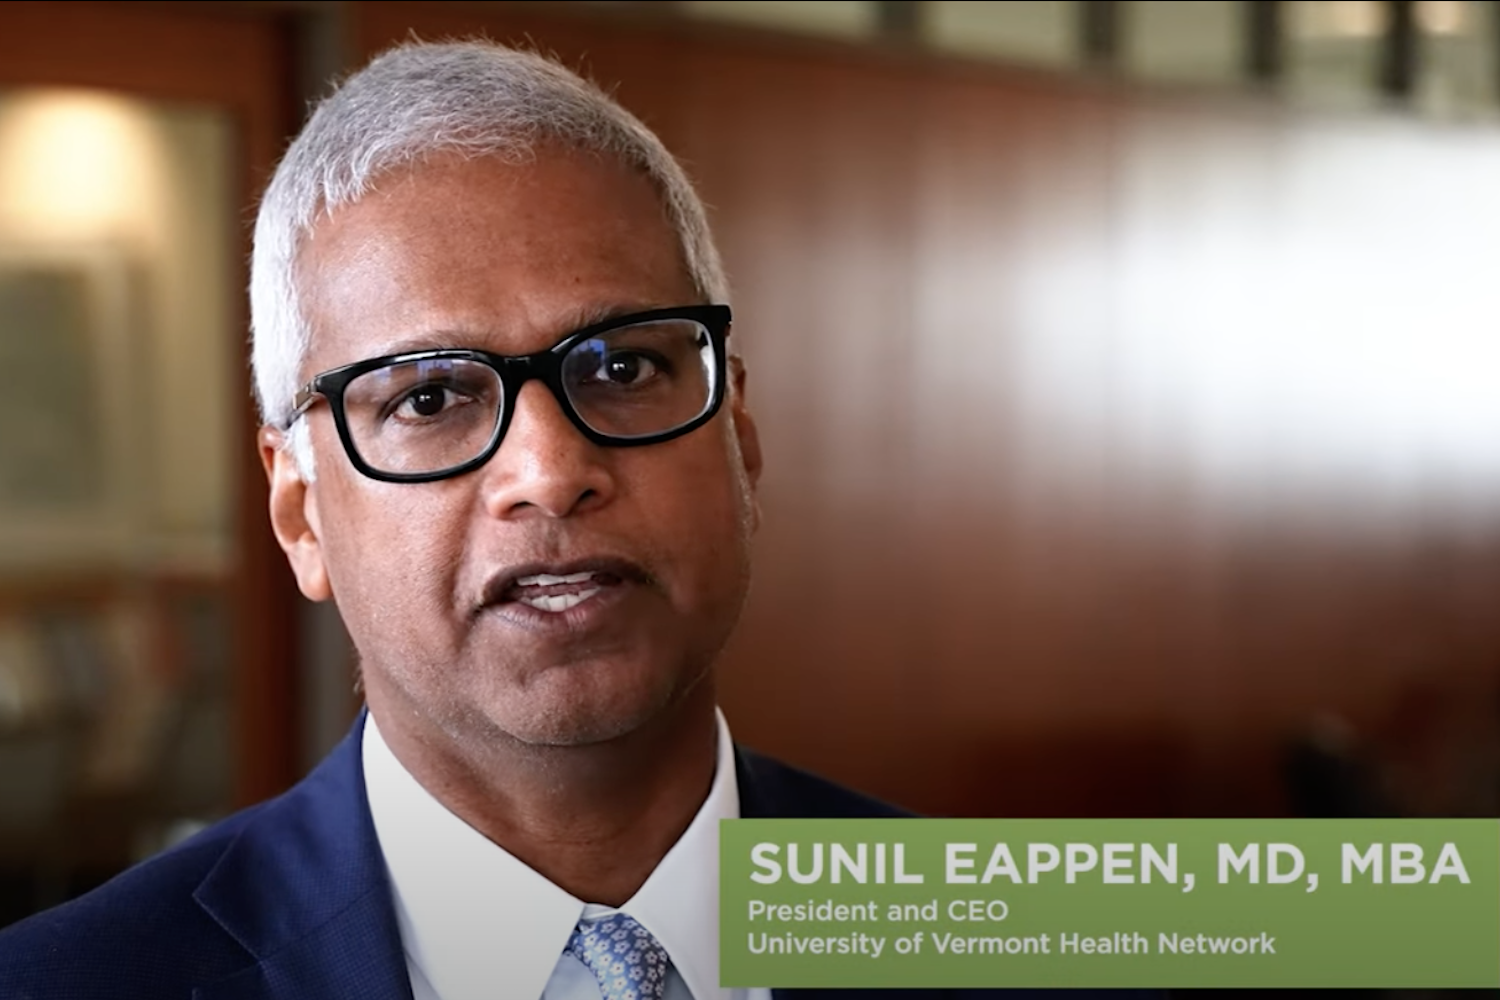 YouTube still of Sunil Eappen, MD, MBA, President and CEO of the UVM Health Network.